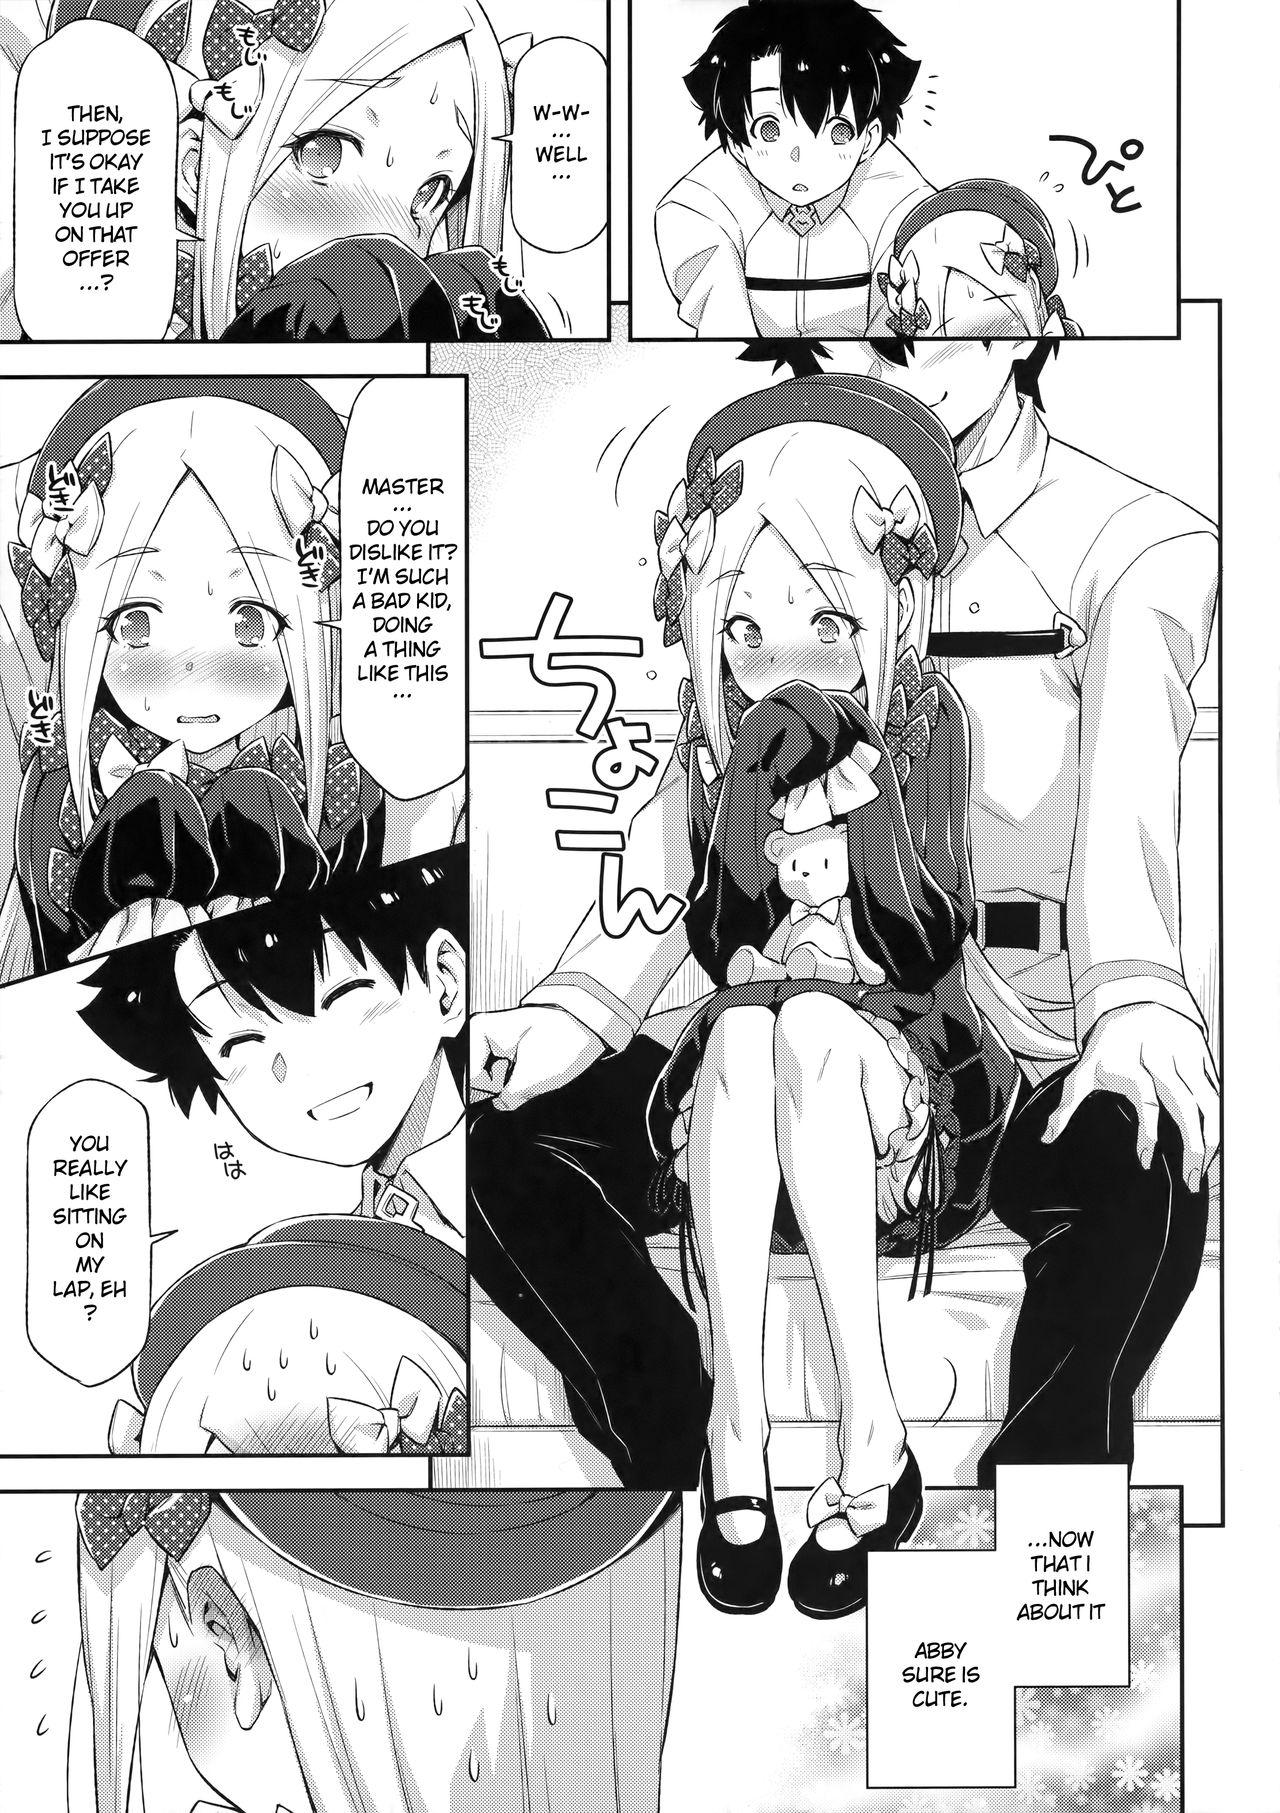 Gym Abigail Williams no Meijoushigataki Kawaisa | The Indescribable Cuteness of Abigail Williams - Fate grand order Family Roleplay - Page 6